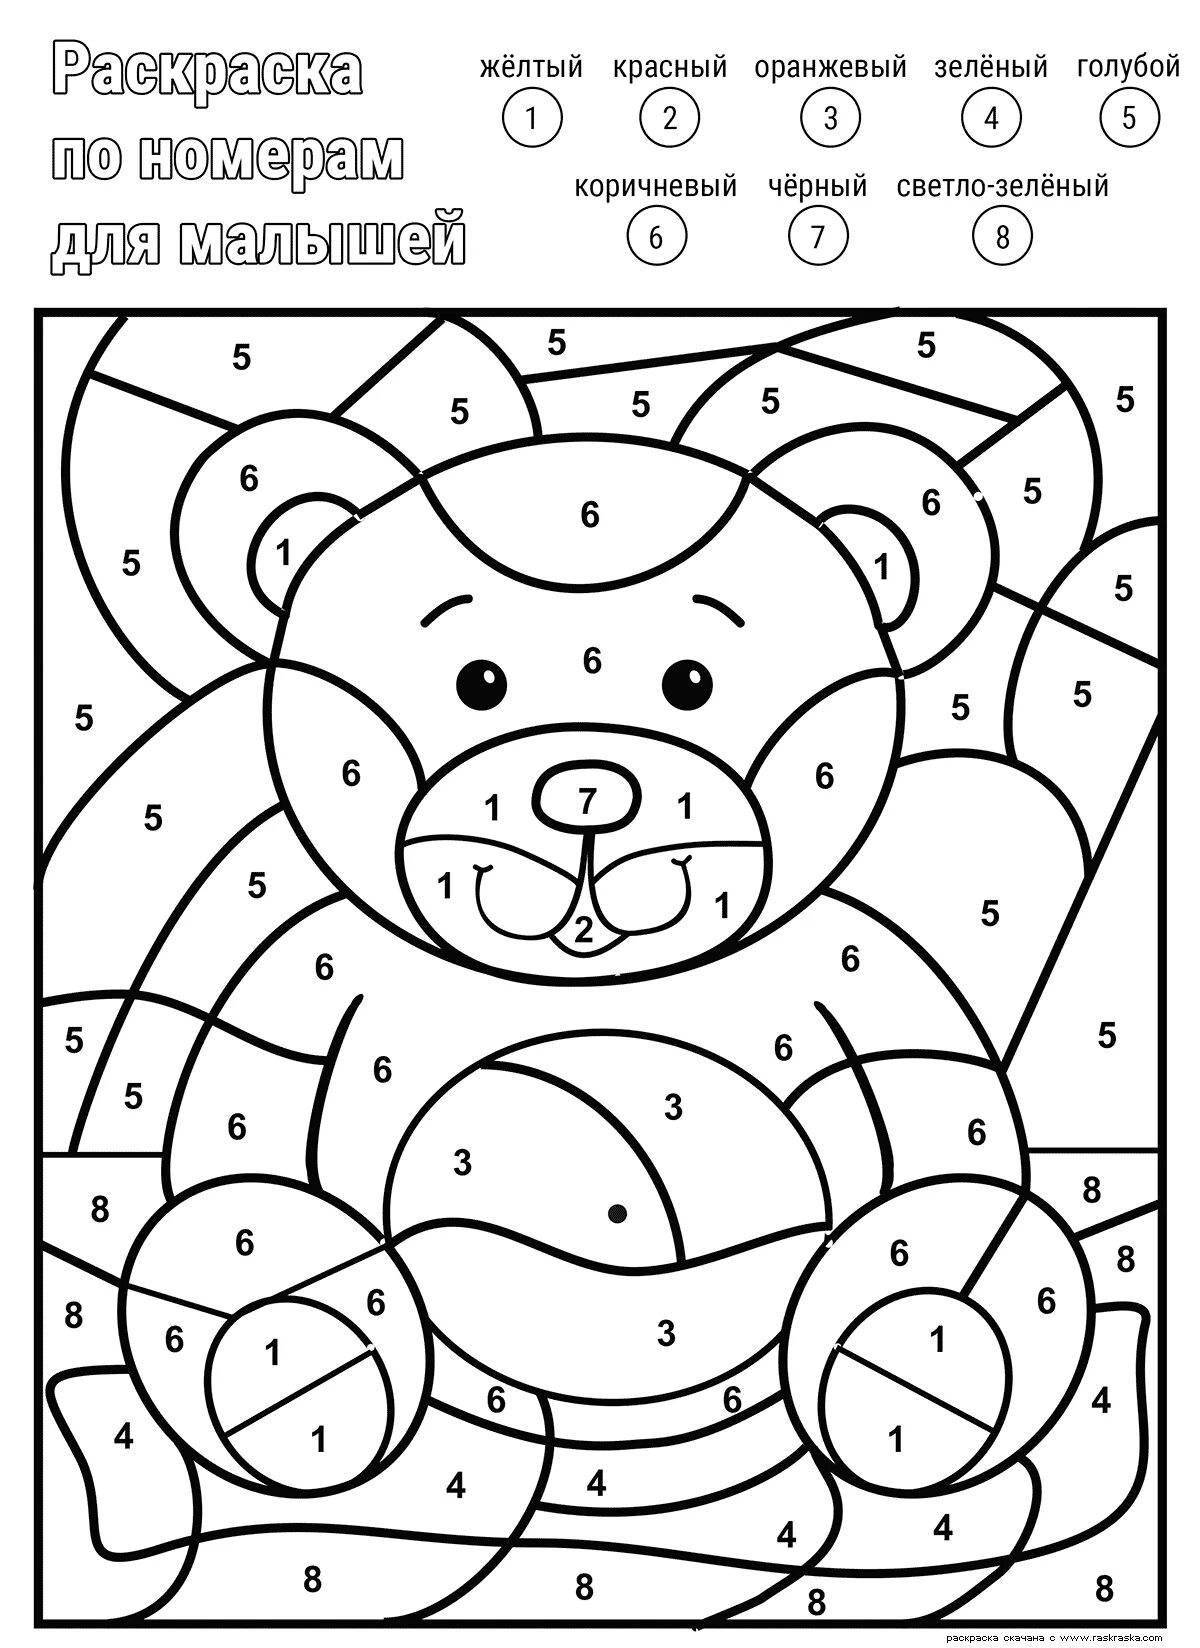 Color-joful coloring page digital for children 6-7 years old